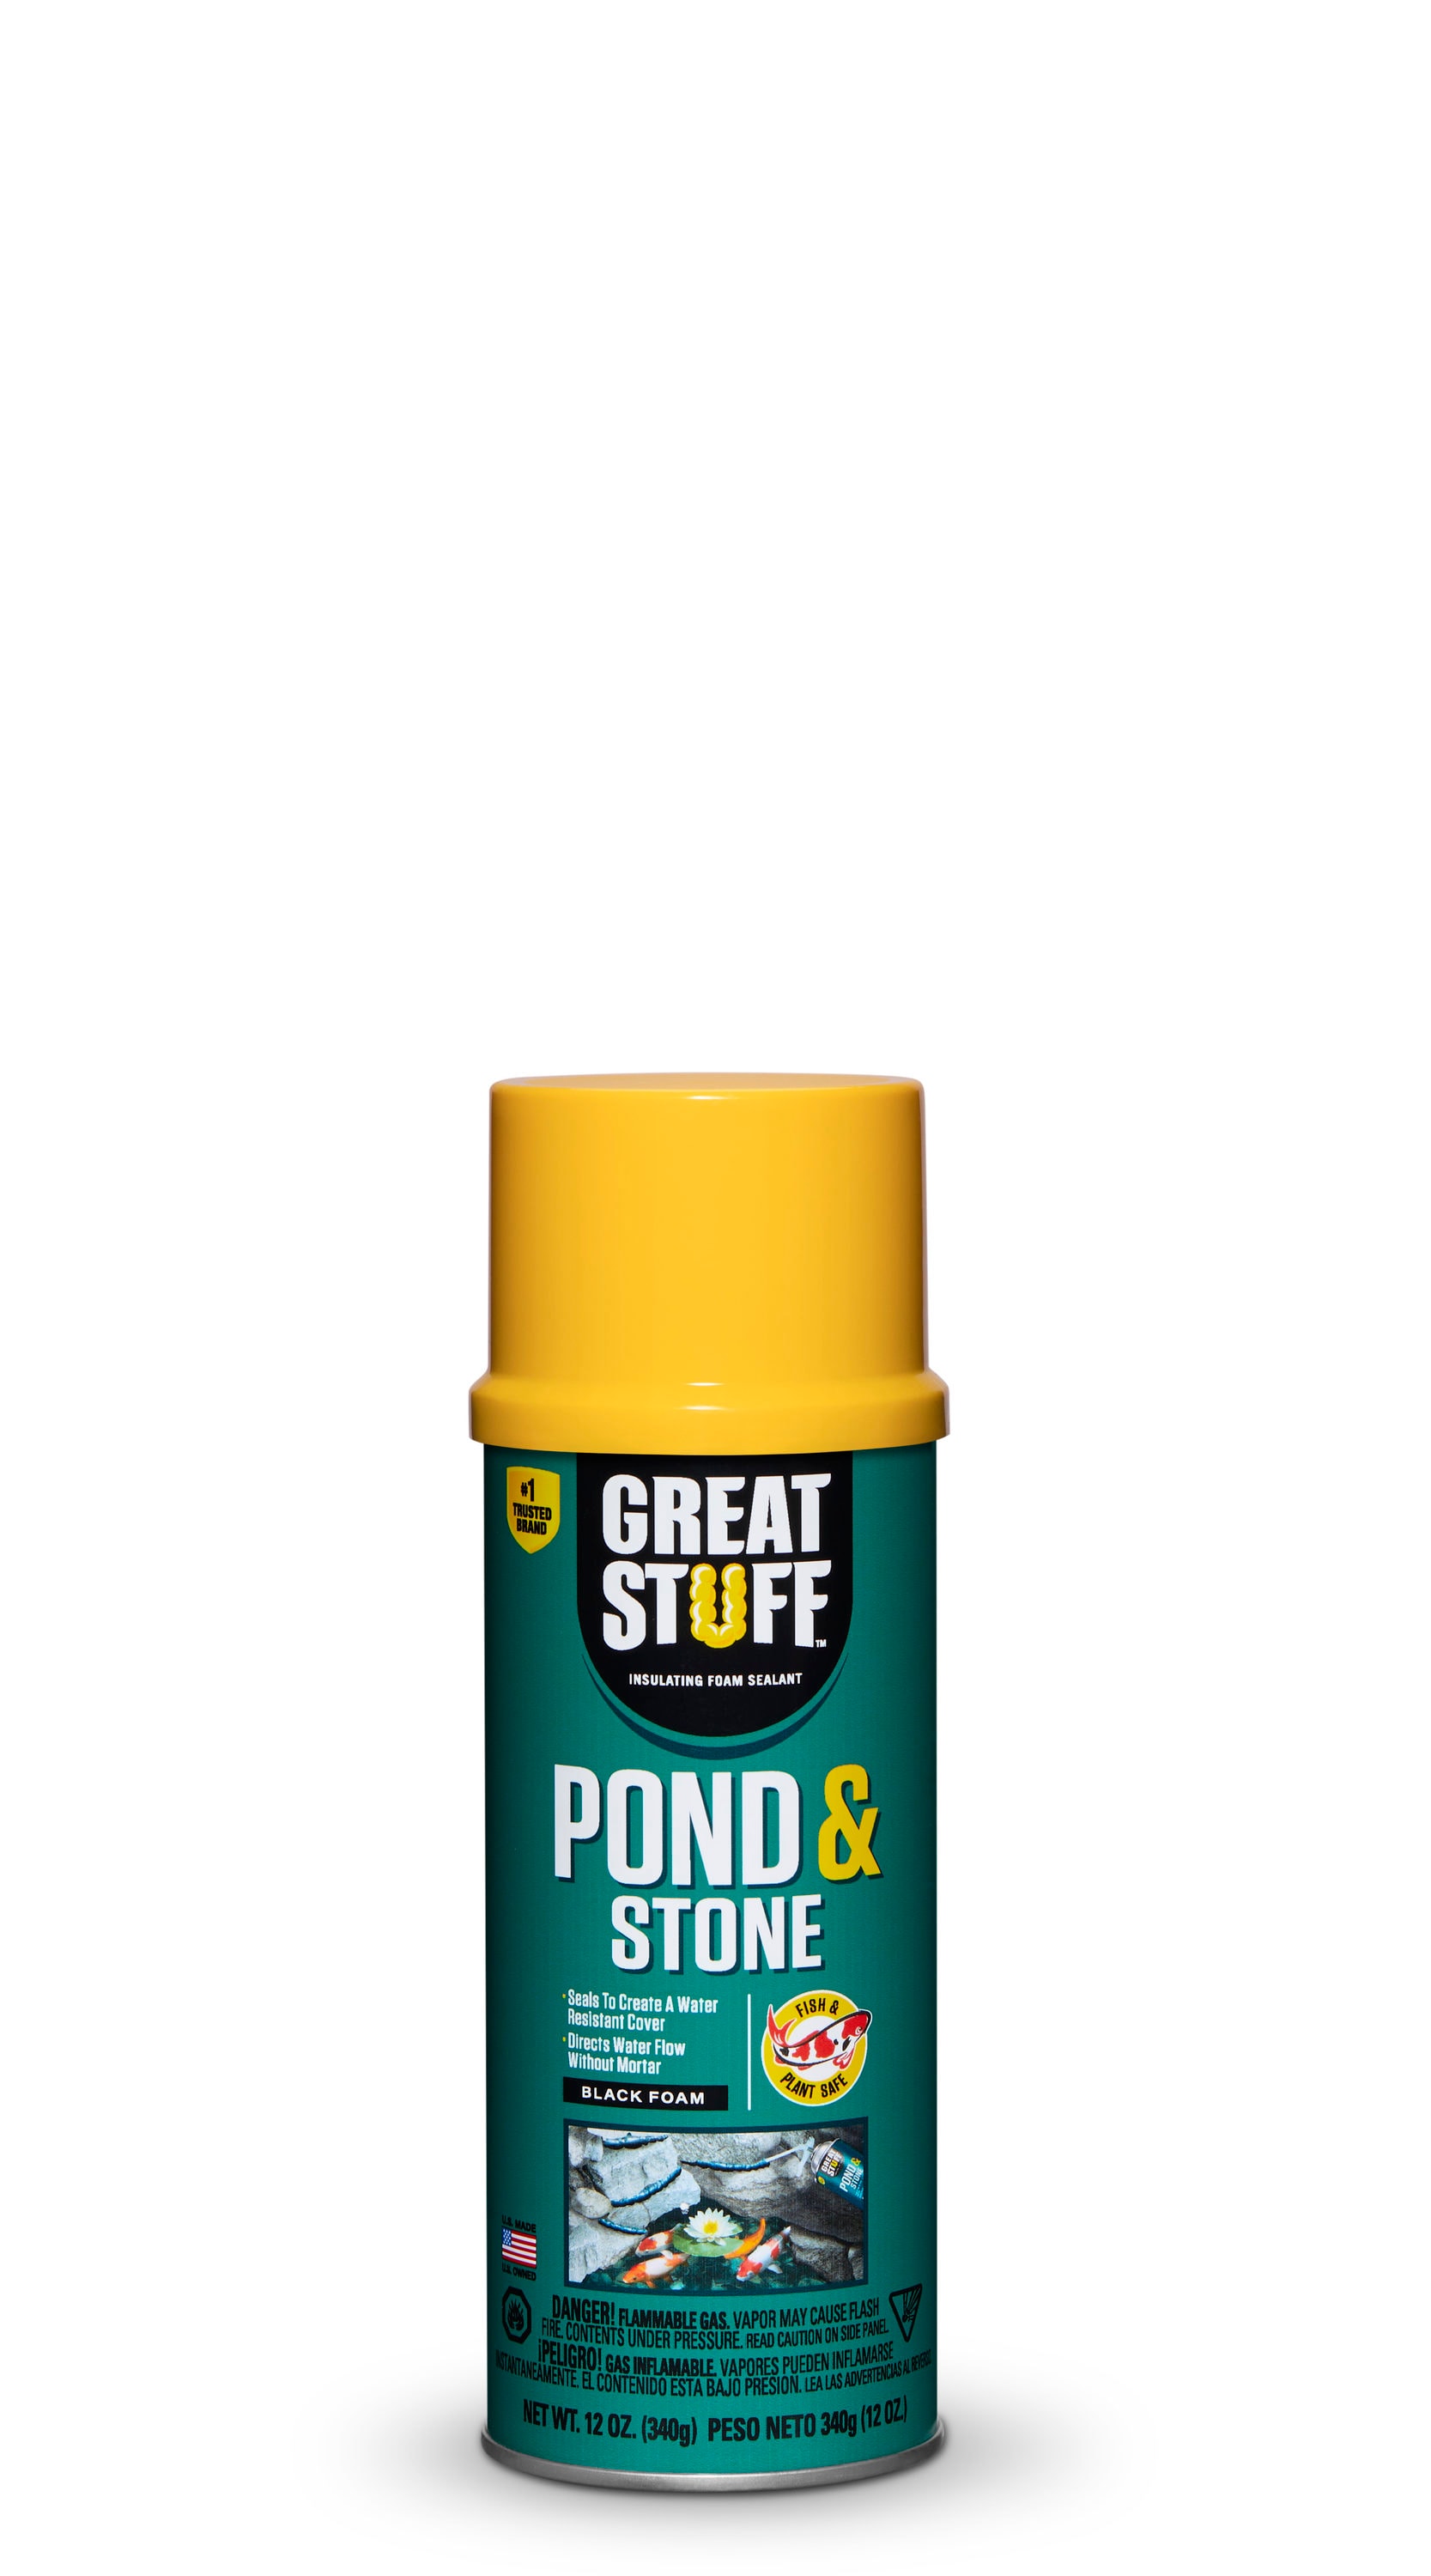 GREAT STUFF Pond and Stone 12 oz Straw Indoor/Outdoor Spray Foam Insulation  at